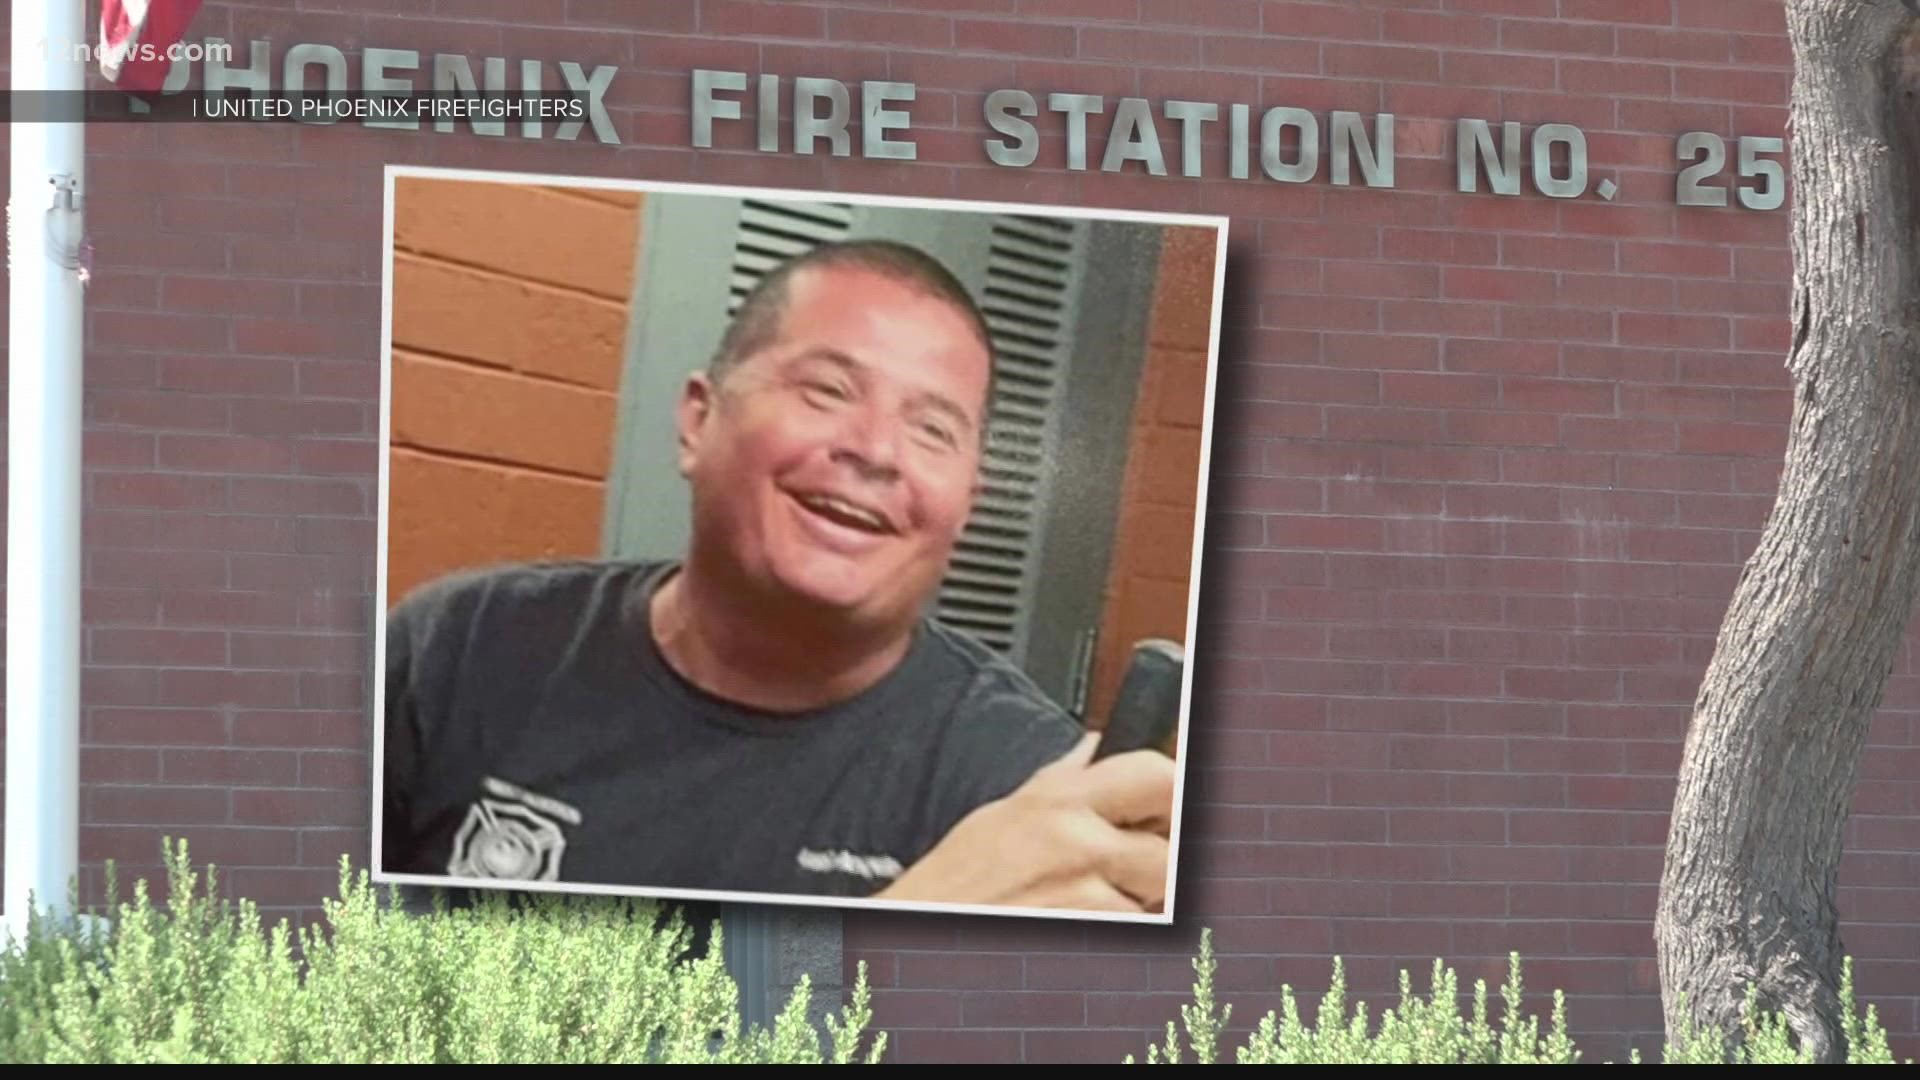 A 15-year veteran of the Phoenix Fire Department has died after a battle with COVID-19. Miguel Angulo is the first firefighter in Phoenix to pass away from COVID.